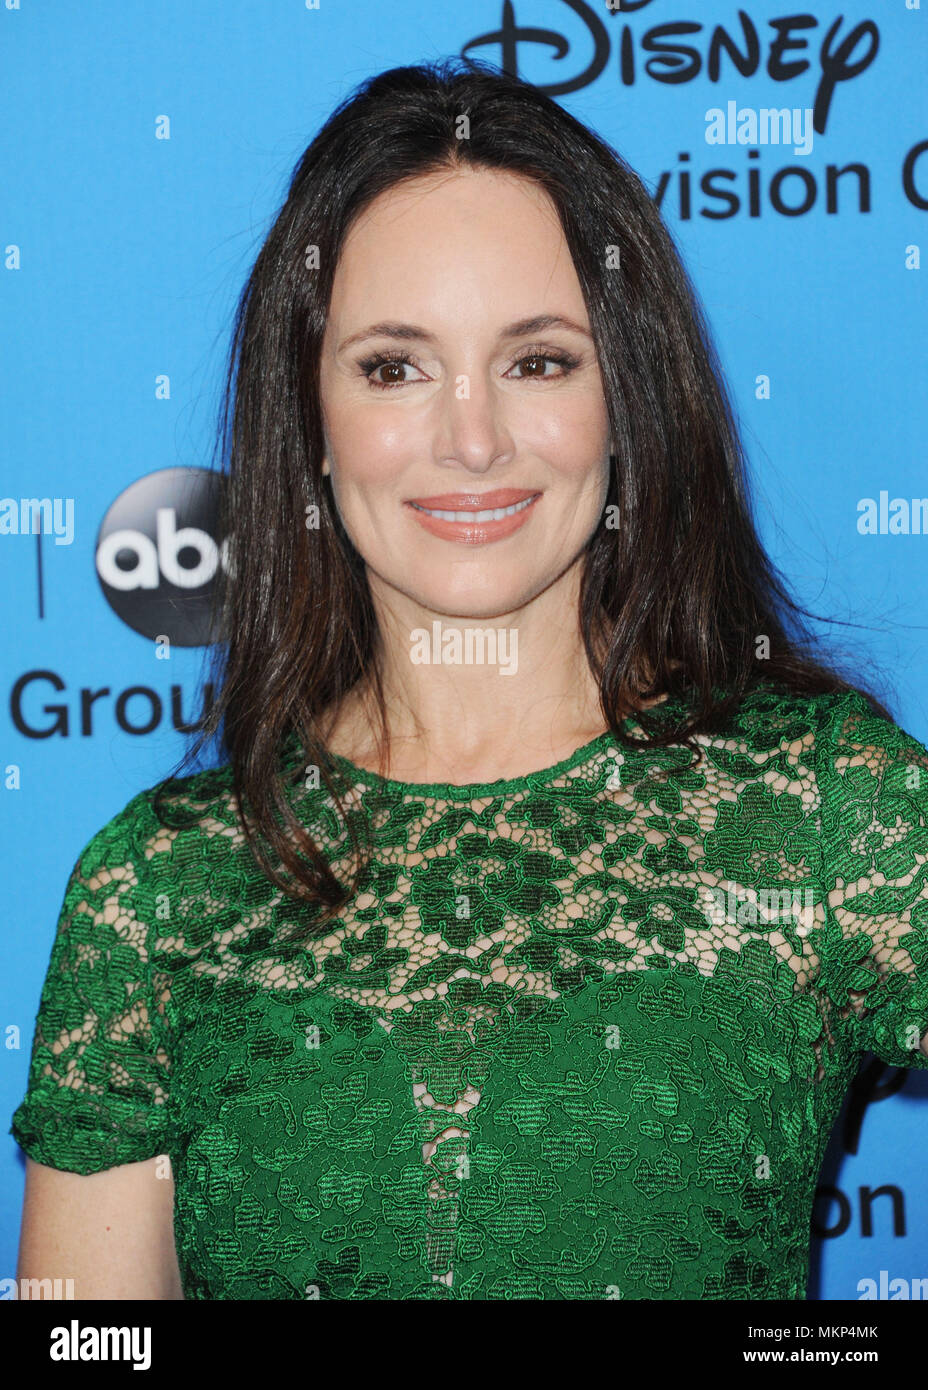 Madeleine Stowe arriving 2013 Disney / ABC tea summer press tour at the  the Beverly Hilton hotel.Madeleine Stowe 125 Red Carpet Event, Vertical, USA, Film Industry, Celebrities,  Photography, Bestof, Arts Culture and Entertainment, Topix Celebrities fashion /  Vertical, Best of, Event in Hollywood Life - California,  Red Carpet and backstage, USA, Film Industry, Celebrities,  movie celebrities, TV celebrities, Music celebrities, Photography, Bestof, Arts Culture and Entertainment,  Topix, headshot, vertical, one person,, from the year , 2013, inquiry tsuni@Gamma-USA.com Stock Photo